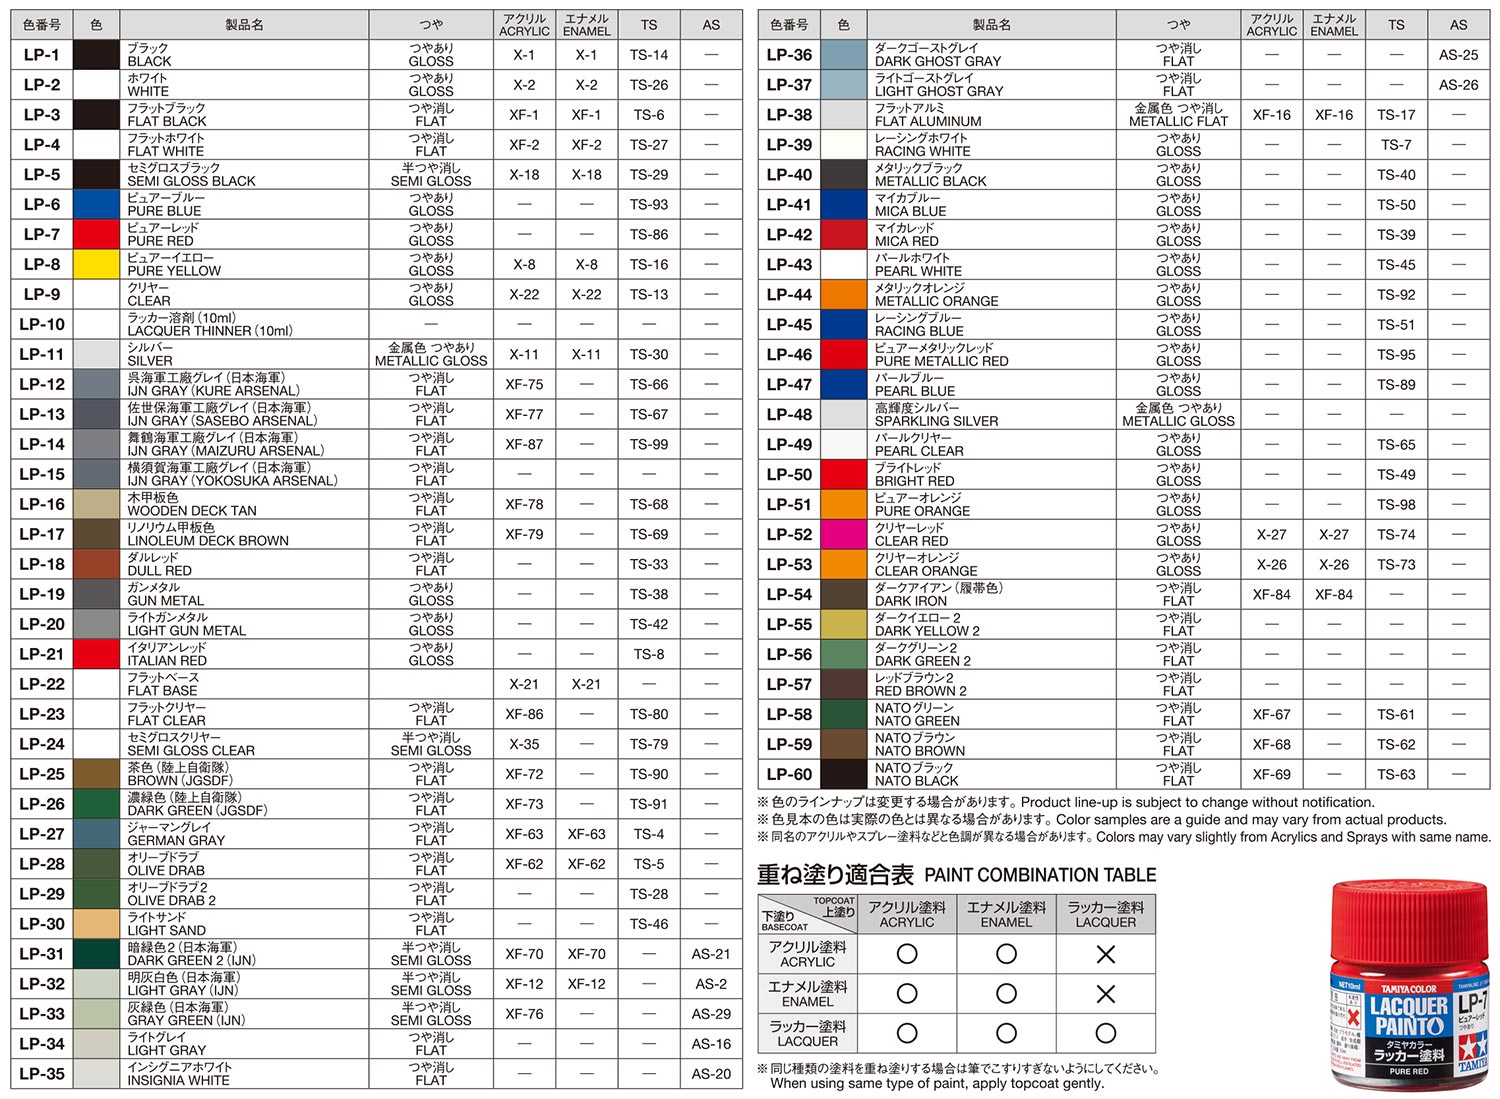 Tamiya color lacquer paint compatibility table / matching ...